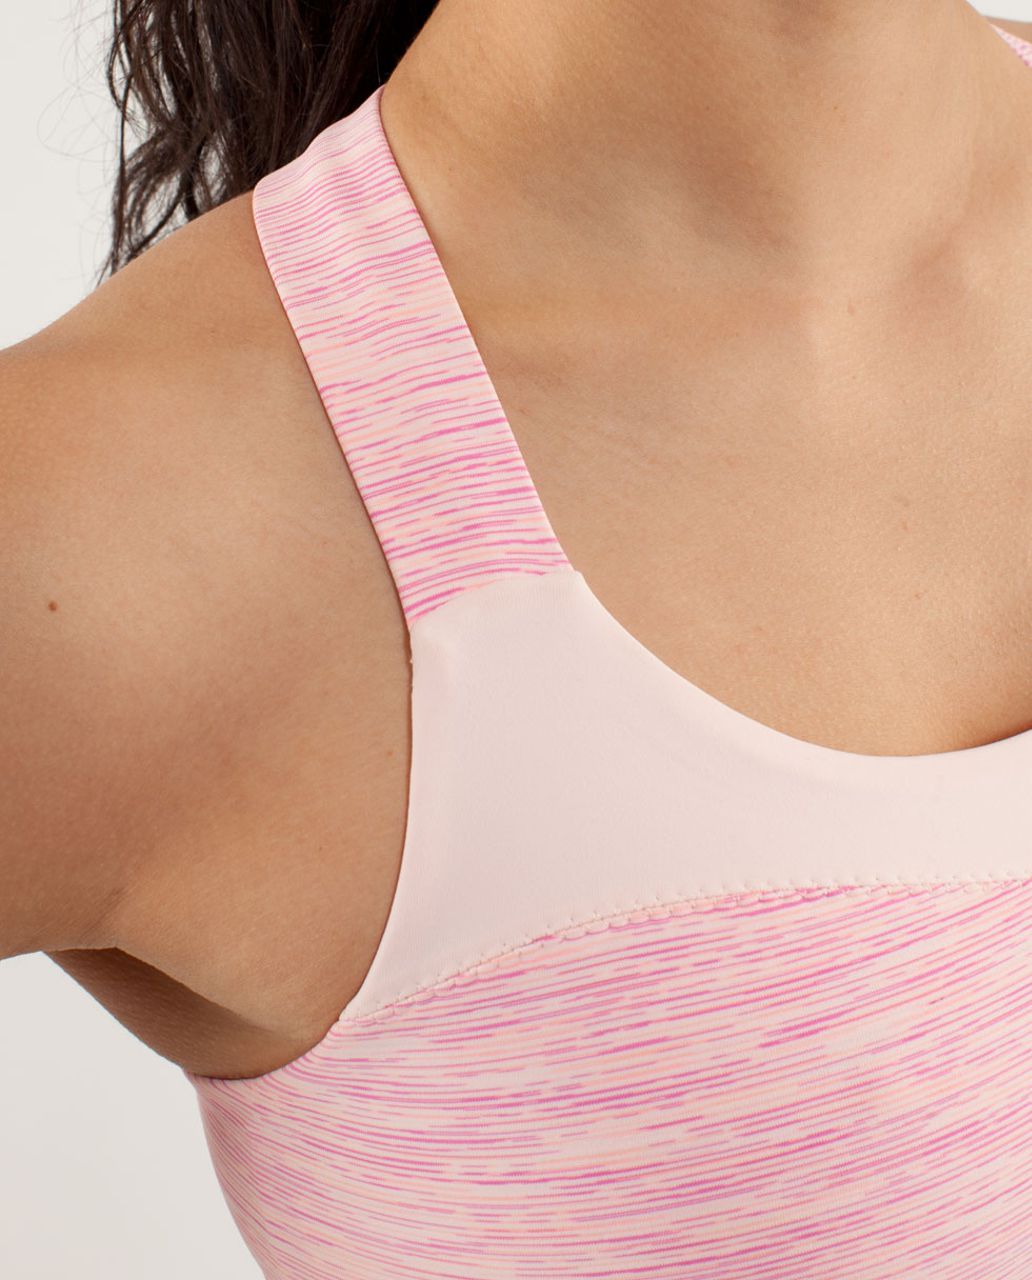 Lululemon Run:  Hook Me Up Bra - Wee Are From Space Parfait Pink